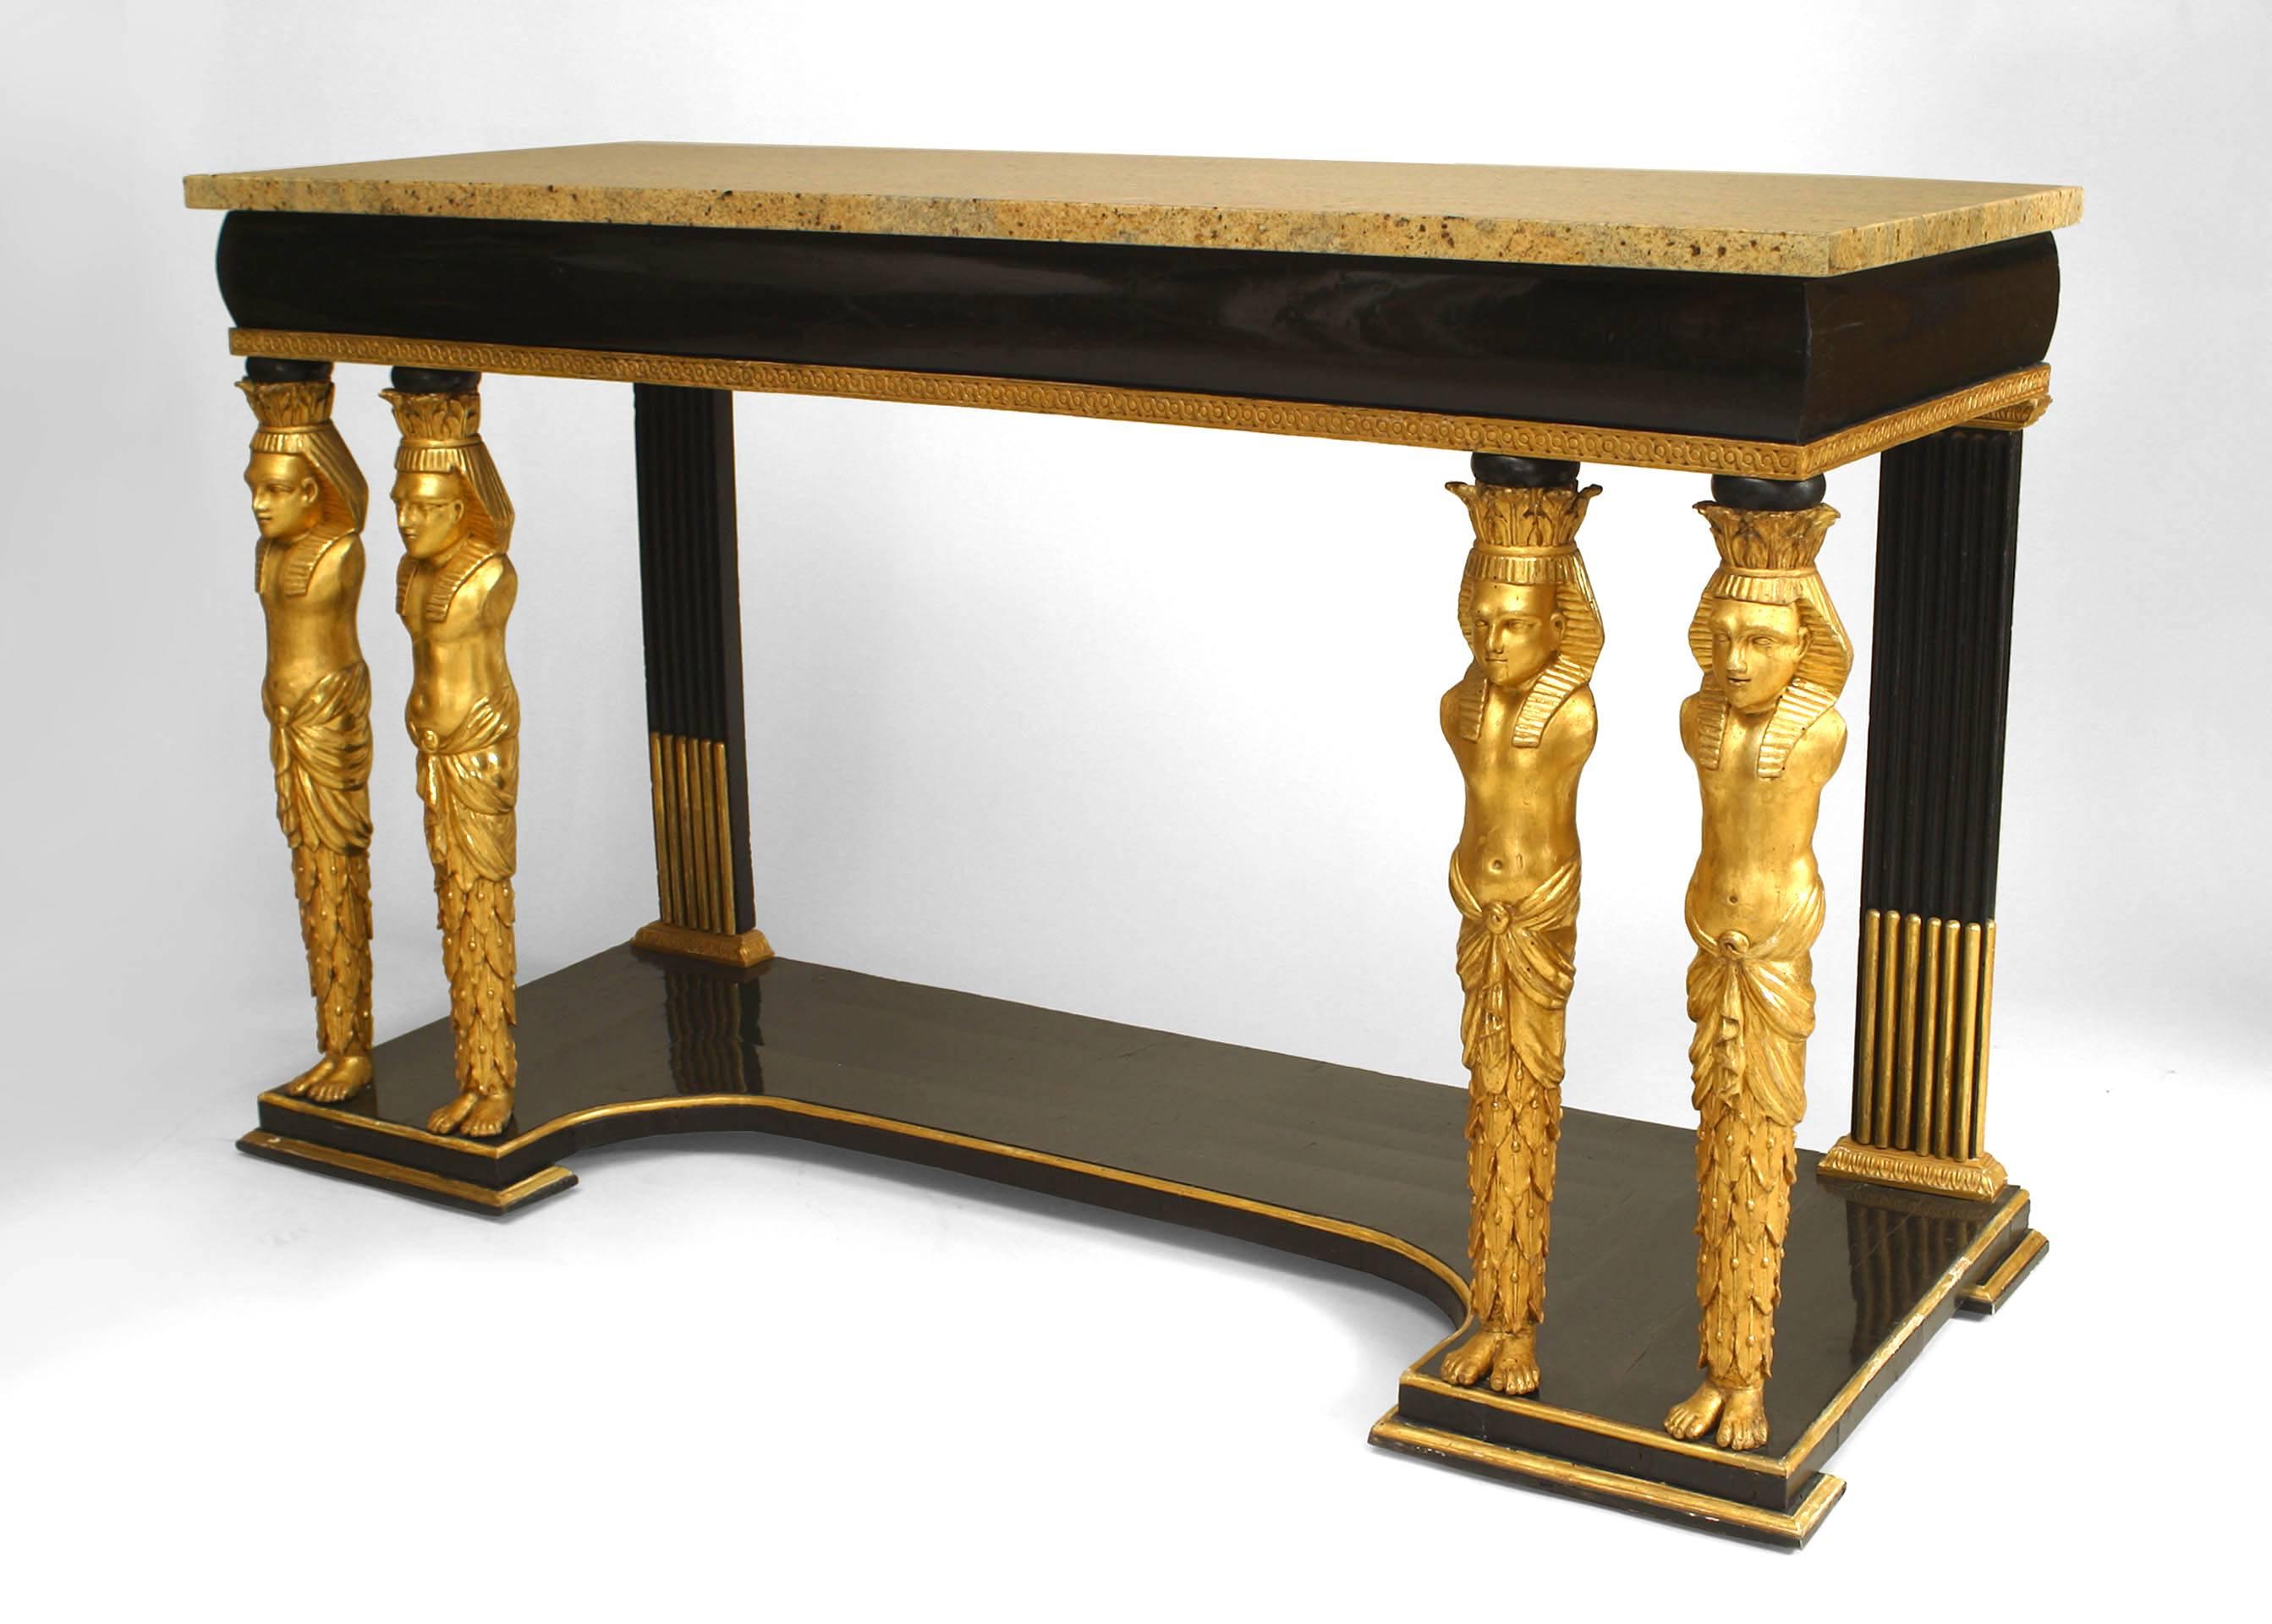 Early 19th century Austrian ebonized and gilt trimmed console table distinguished by four gilt carved classical Egyptian figural pillars, each resting upon a platform base and supporting a marble top.